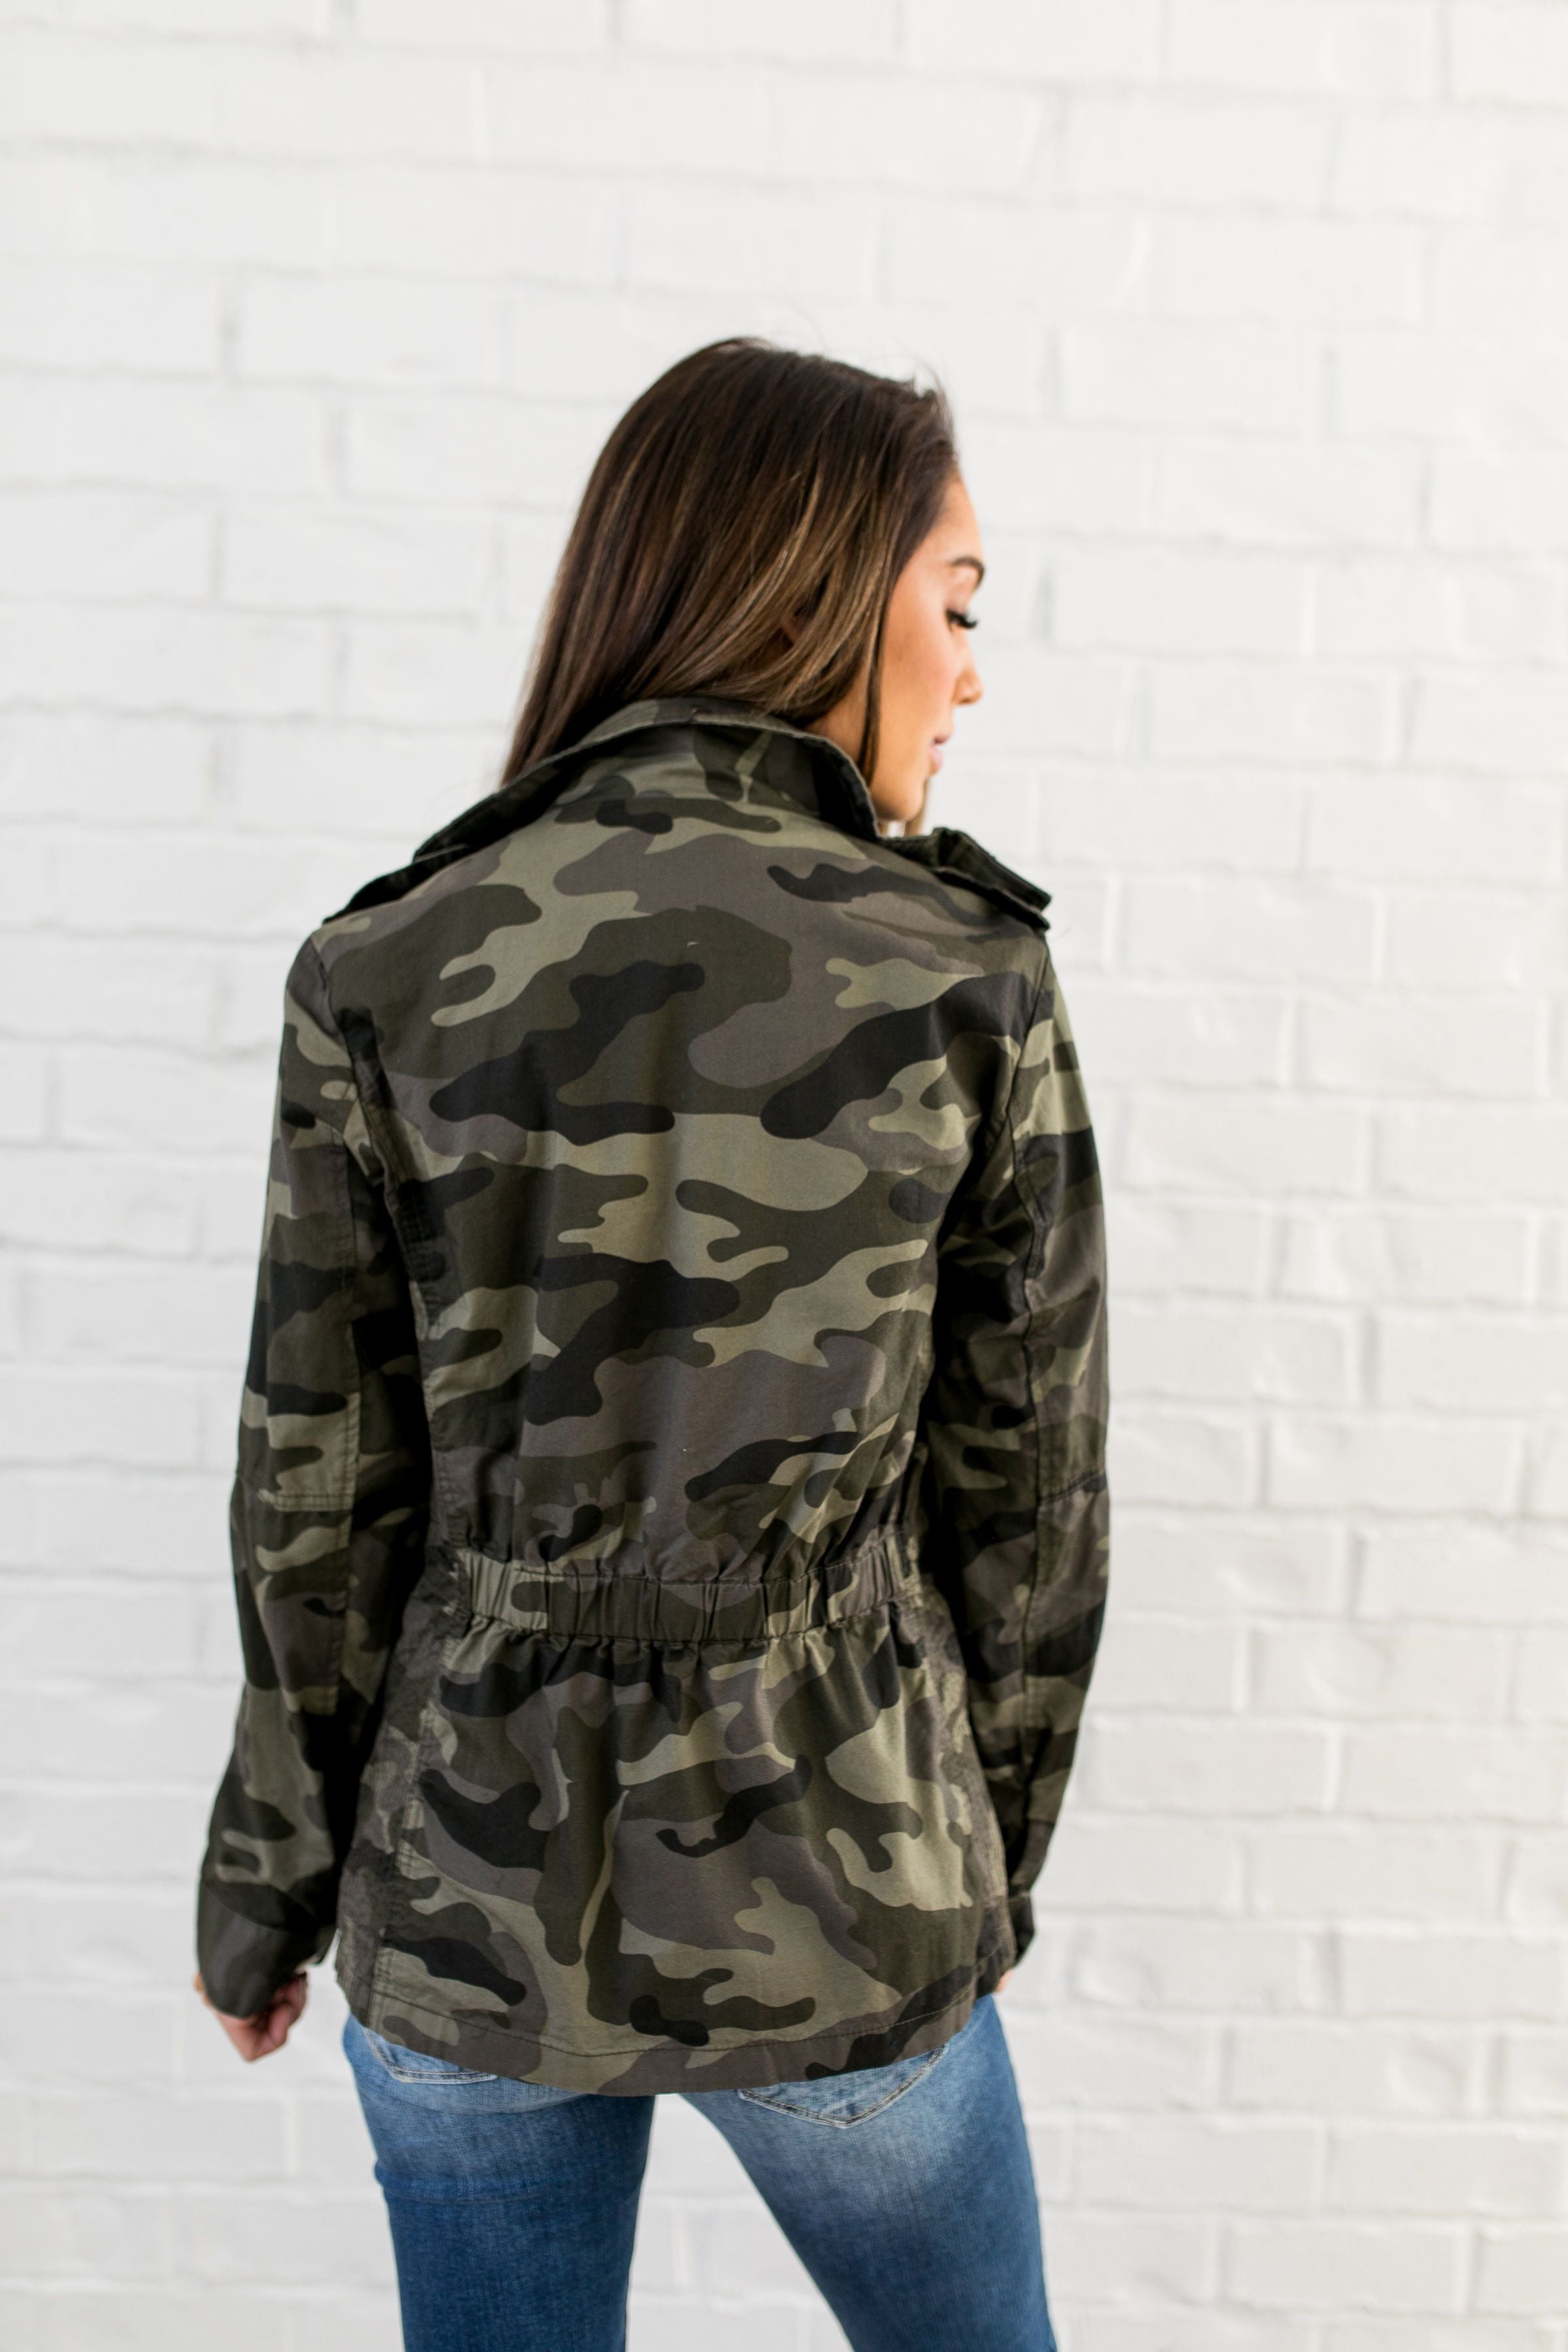 You Can Do Anything Camouflage Jacket - ALL SALES FINAL